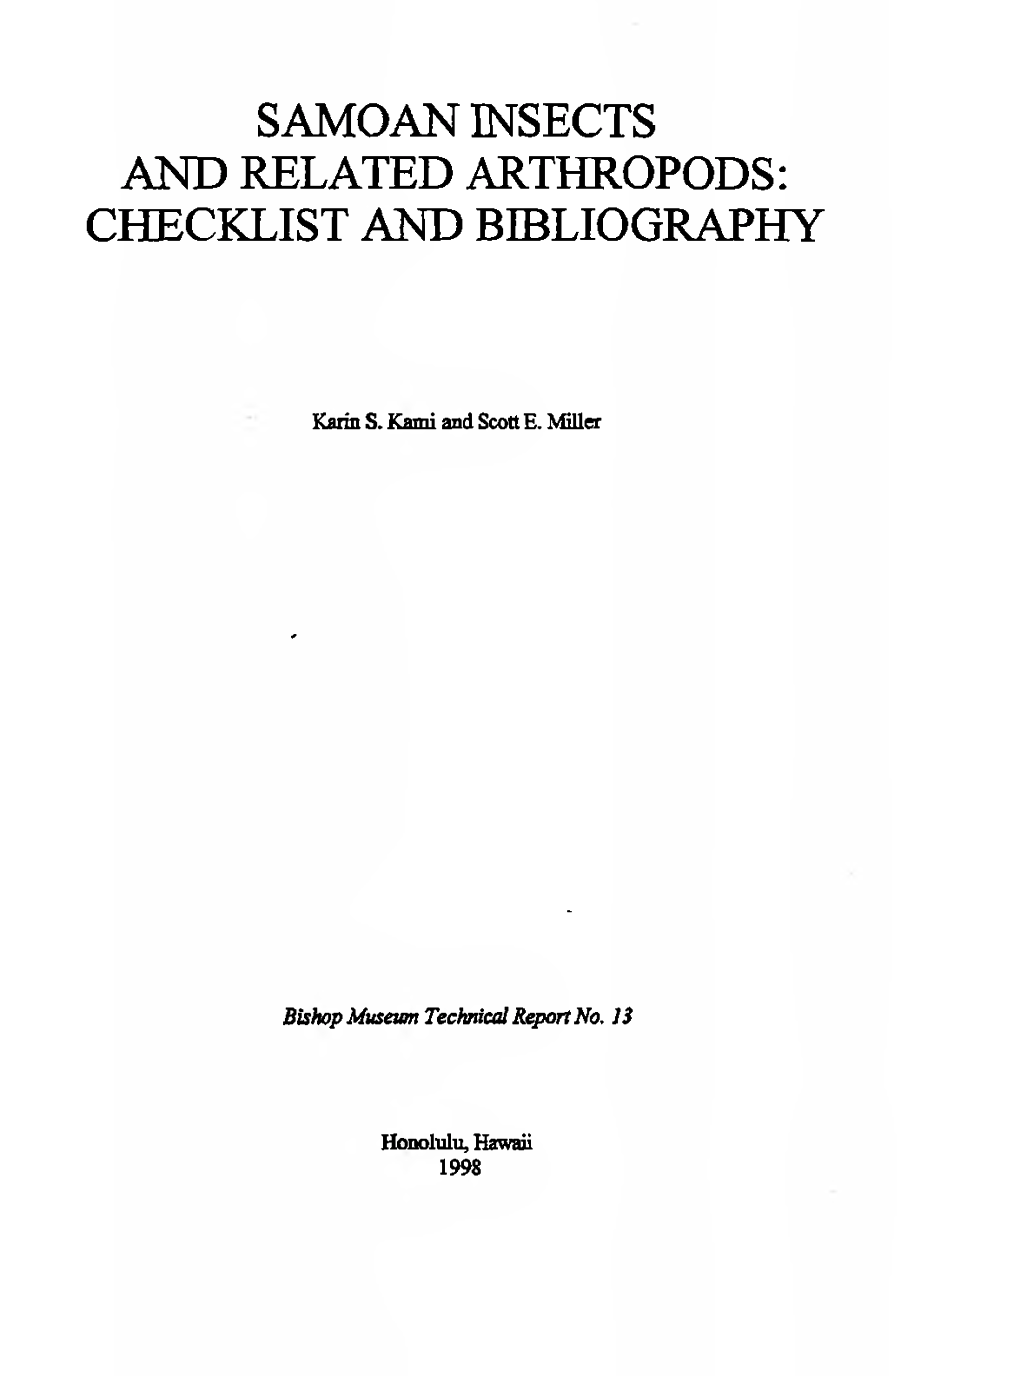 Samoan Insects Akd Related Arthropods: Checklist and Bibliography